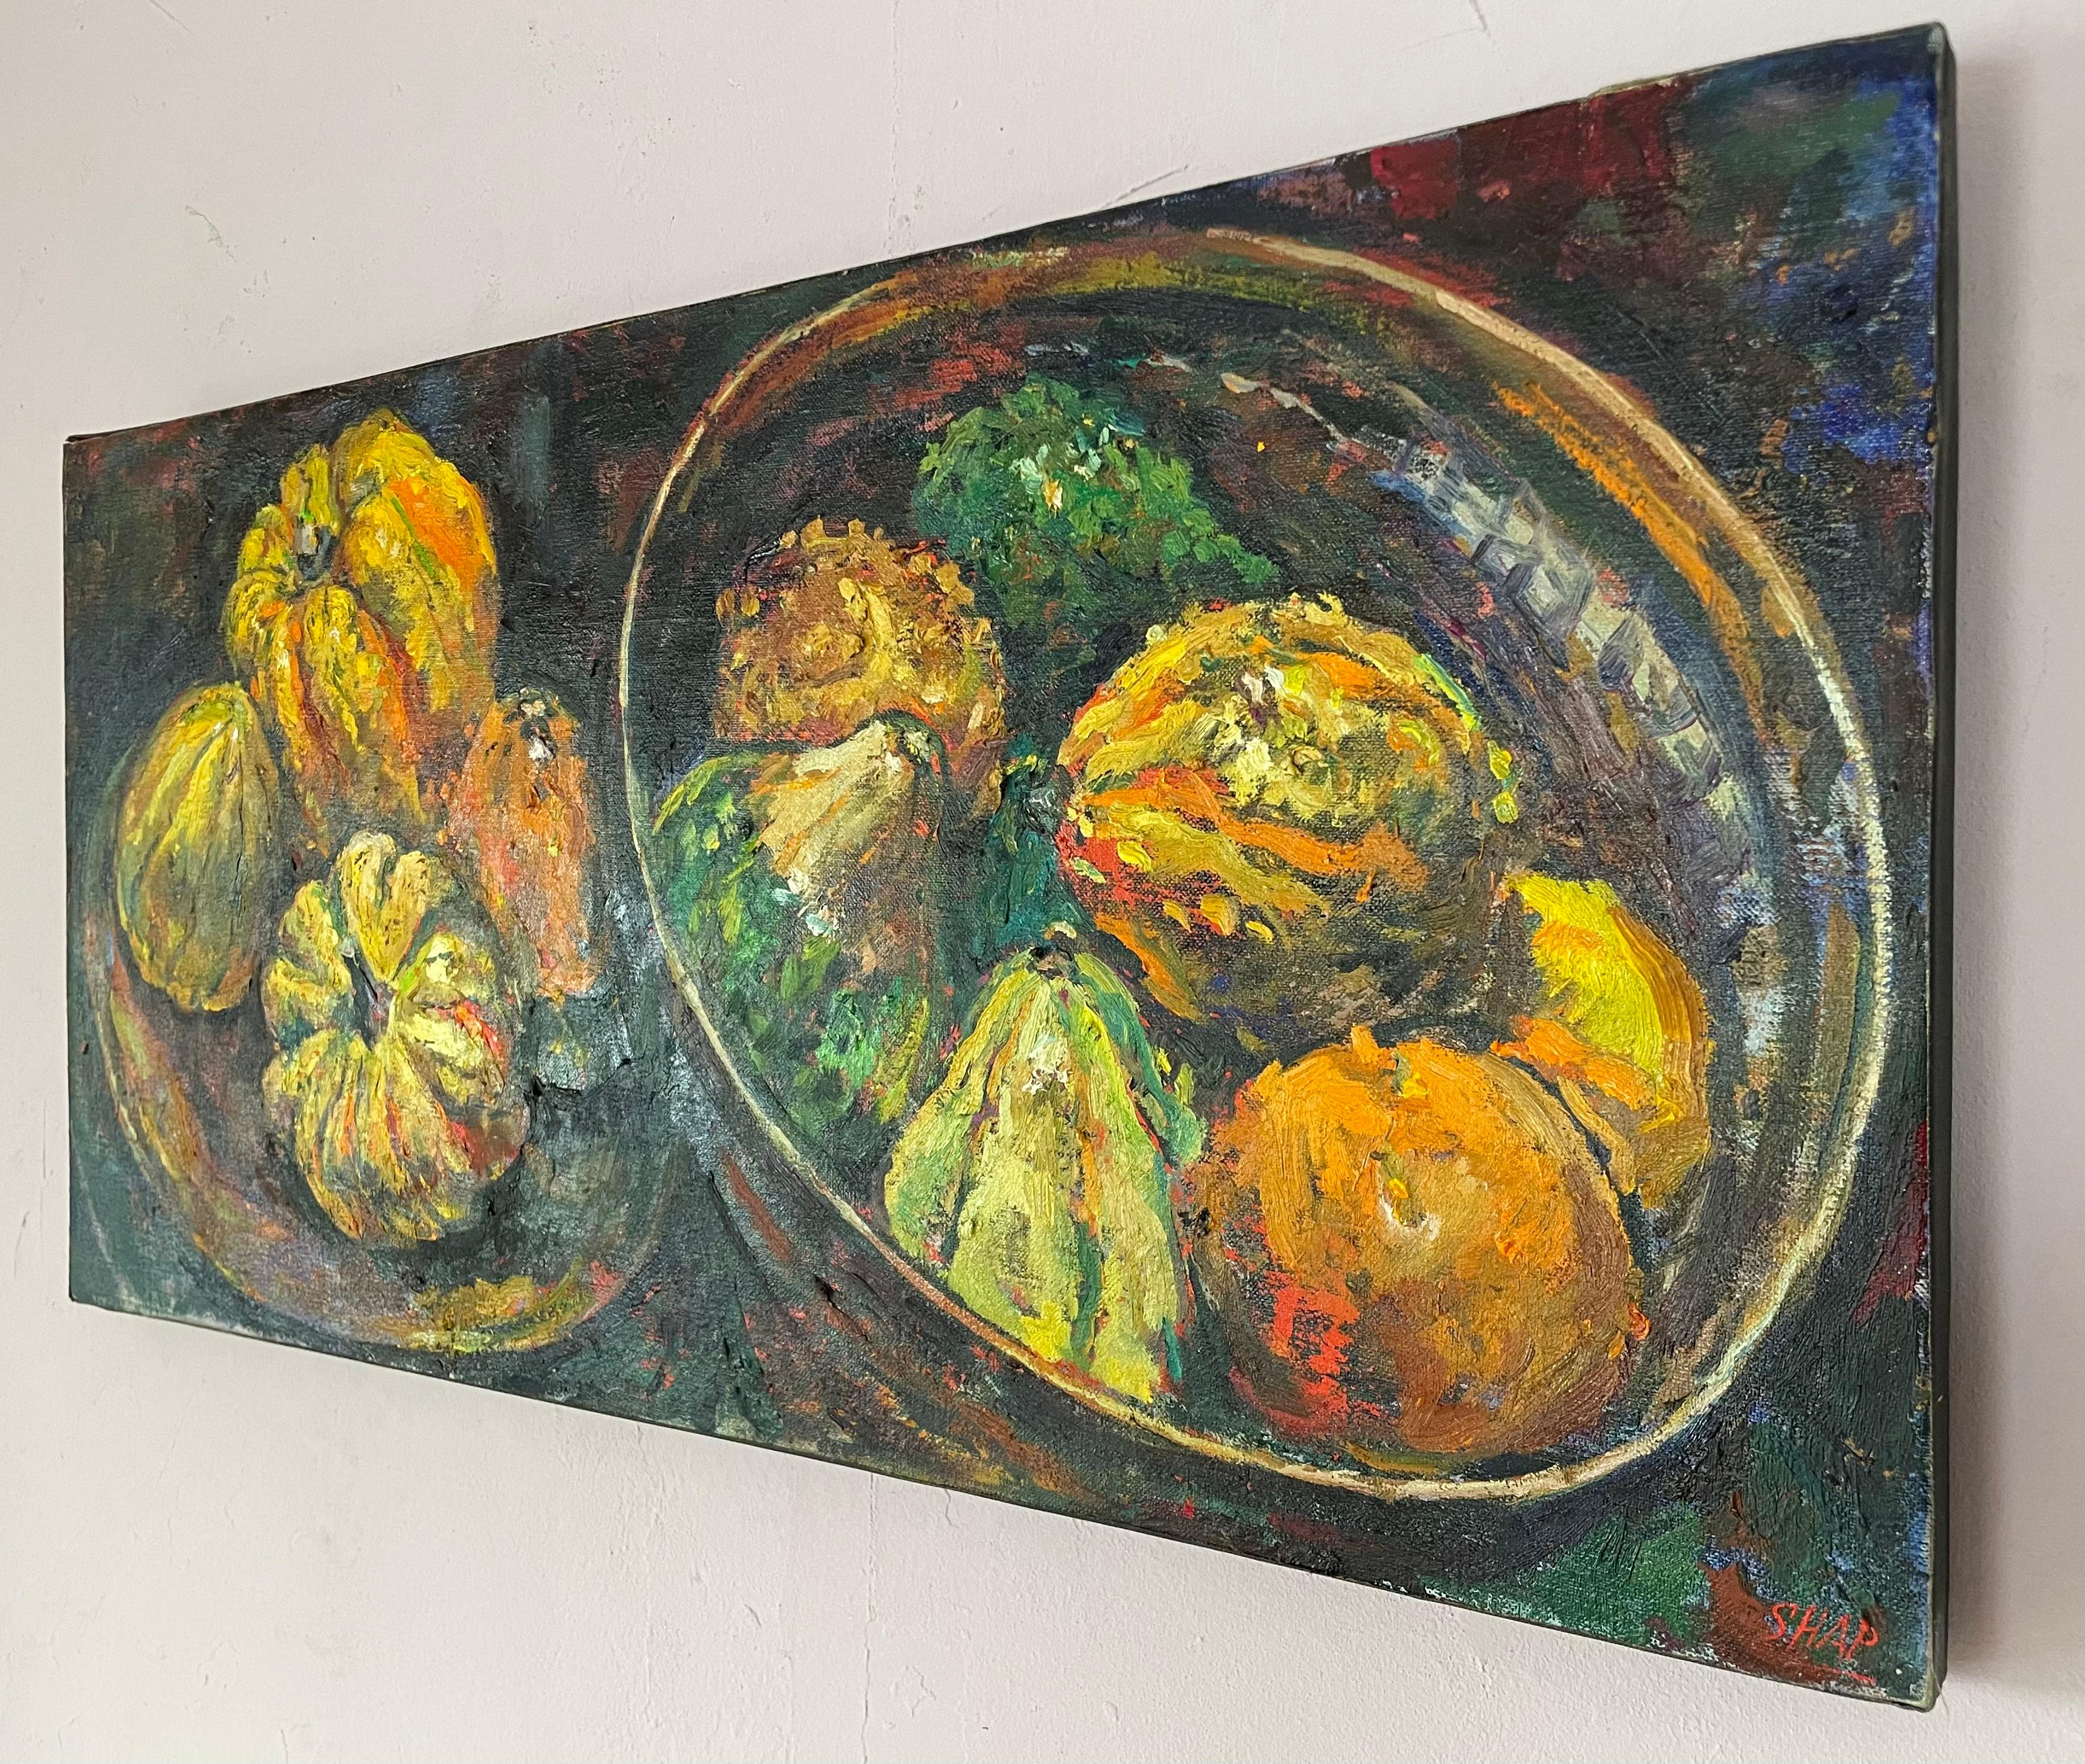 Original oil painting by celebrated, twentieth-century California landscape painter, Ronald Shap. A unique, double still life of two bowls of autumn squash and pumpkins in a loose, impressionist style. Predominate colors are yellow, orange and